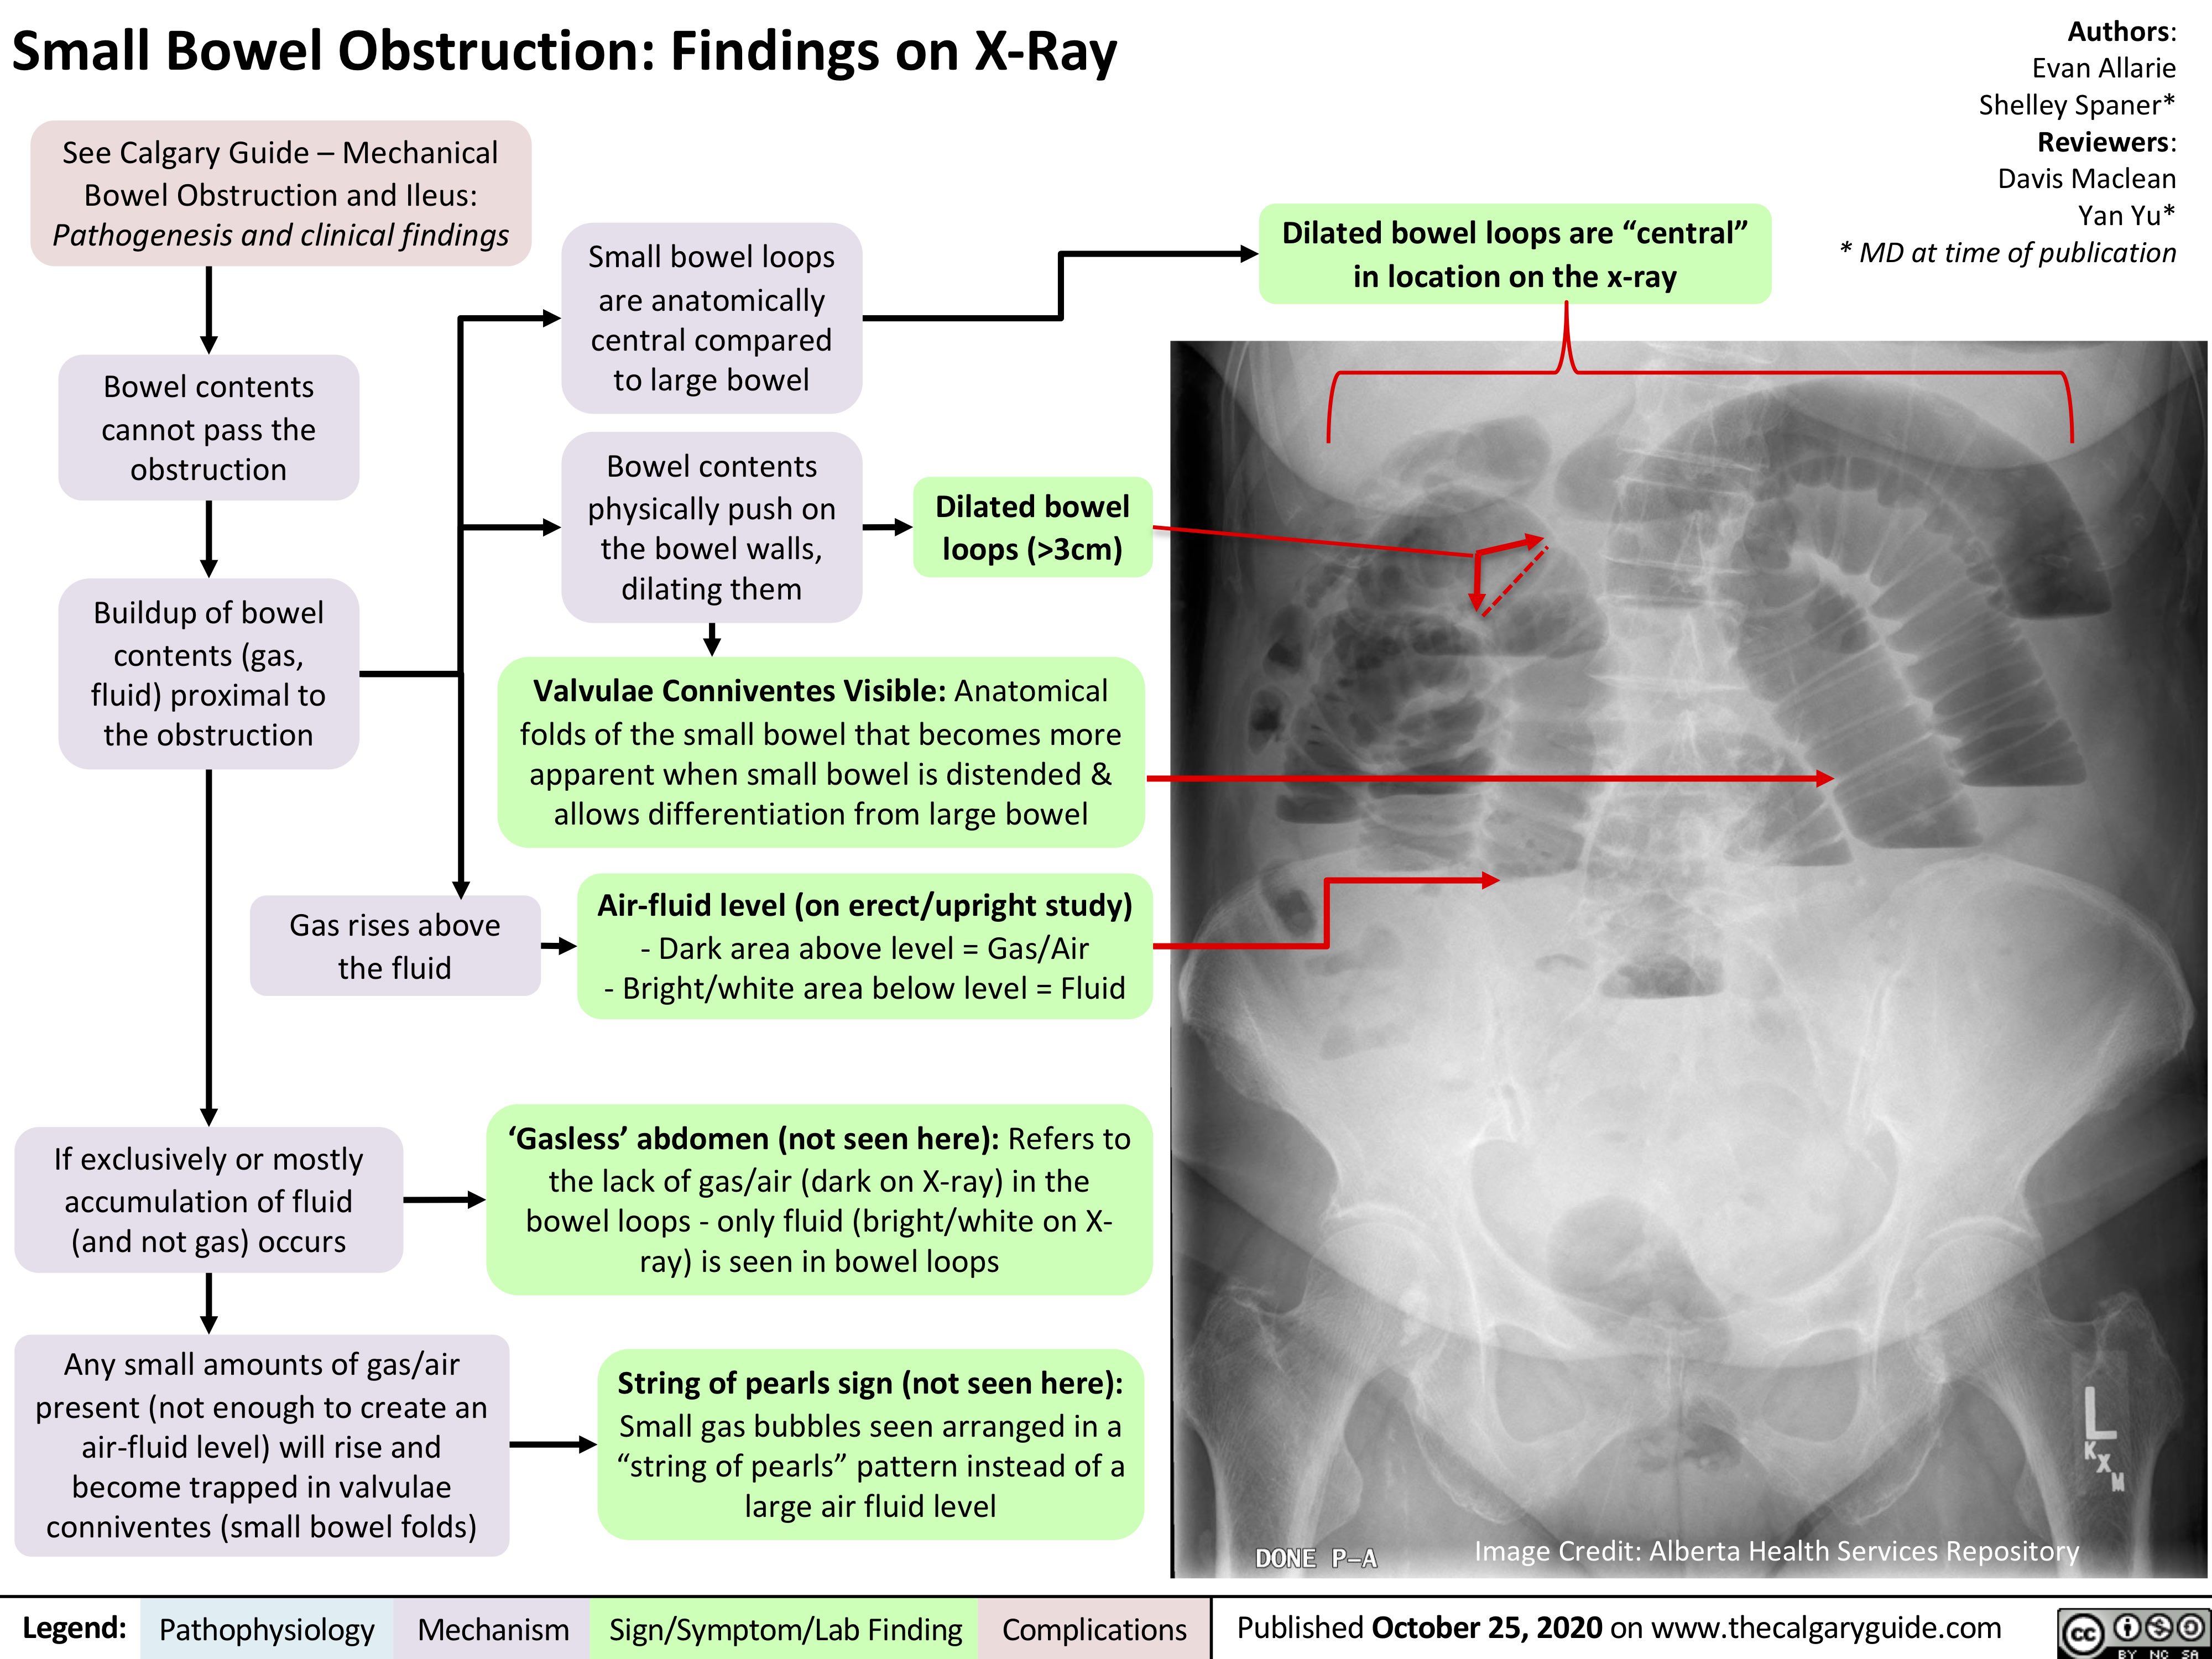 Small Bowel Obstruction: Findings on X-Ray
Authors: Evan Allarie Shelley Spaner* Reviewers: Davis Maclean Yan Yu* * MD at time of publication
 See Calgary Guide – Mechanical Bowel Obstruction and Ileus: Pathogenesis and clinical findings
Bowel contents cannot pass the obstruction
Buildup of bowel contents (gas, fluid) proximal to the obstruction
Gas rises above the fluid
If exclusively or mostly accumulation of fluid (and not gas) occurs
Any small amounts of gas/air present (not enough to create an
air-fluid level) will rise and become trapped in valvulae conniventes (small bowel folds)
Small bowel loops are anatomically
central compared to large bowel
Bowel contents physically push on the bowel walls, dilating them
Dilated bowel loops are “central” in location on the x-ray
          Dilated bowel loops (>3cm)
            Valvulae Conniventes Visible: Anatomical folds of the small bowel that becomes more
apparent when small bowel is distended & allows differentiation from large bowel
Air-fluid level (on erect/upright study)
- Dark area above level = Gas/Air
- Bright/white area below level = Fluid
       ‘Gasless’ abdomen (not seen here): Refers to the lack of gas/air (dark on X-ray) in the bowel loops - only fluid (bright/white on X- ray) is seen in bowel loops
String of pearls sign (not seen here):
Small gas bubbles seen arranged in a “string of pearls” pattern instead of a large air fluid level
      Image Credit: Alberta Health Services Repository
 Legend:
 Pathophysiology
Mechanism
Sign/Symptom/Lab Finding
  Complications
Published October 25, 2020 on www.thecalgaryguide.com
    